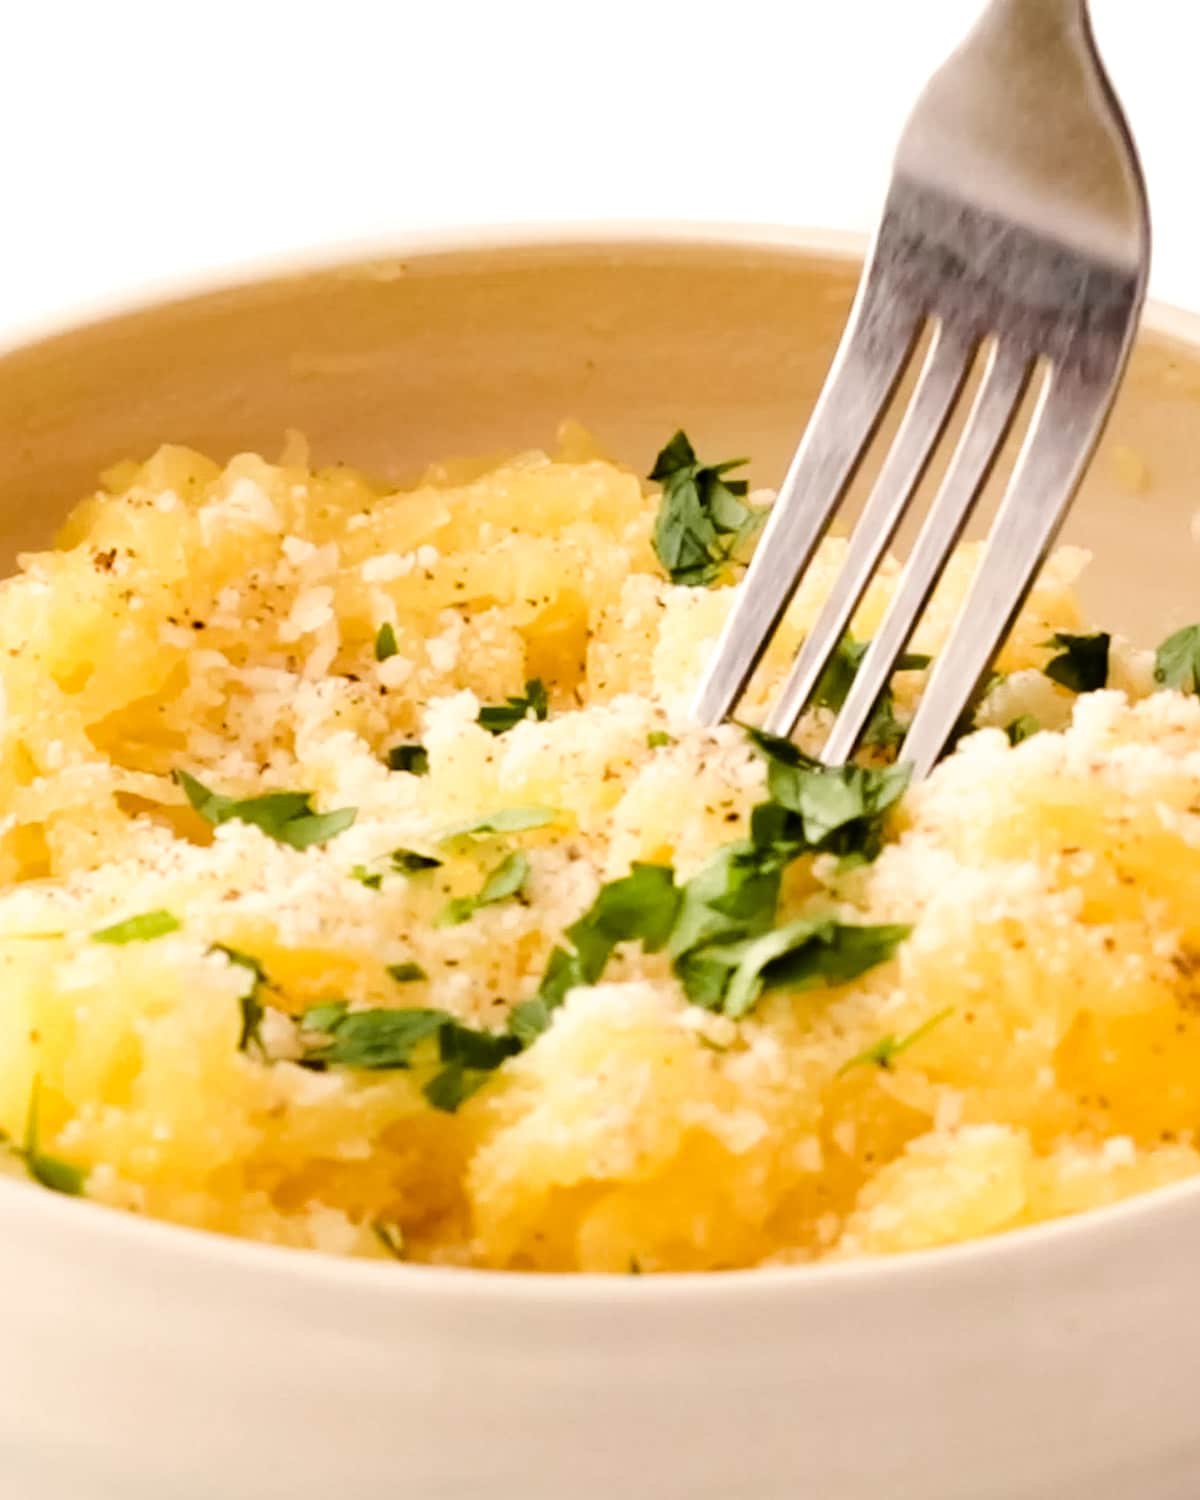 Spaghetti squash with butter, Parmesan cheese, parsley and black pepper in a ceramic bowl with a fork dipping in for a bite